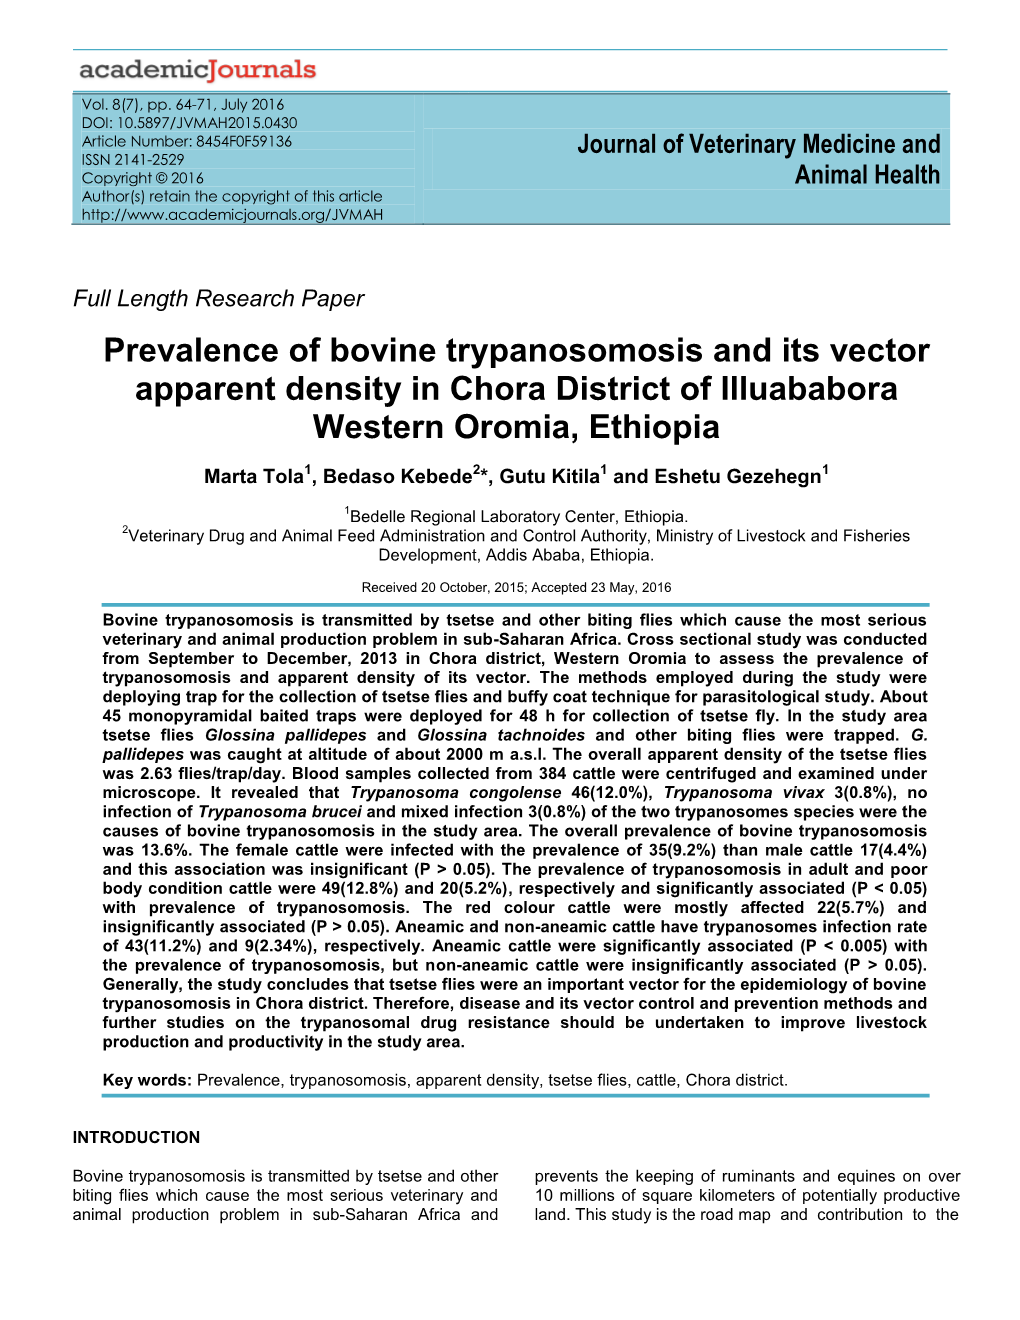 Prevalence of Bovine Trypanosomosis and Its Vector Apparent Density in Chora District of Illuababora Western Oromia, Ethiopia